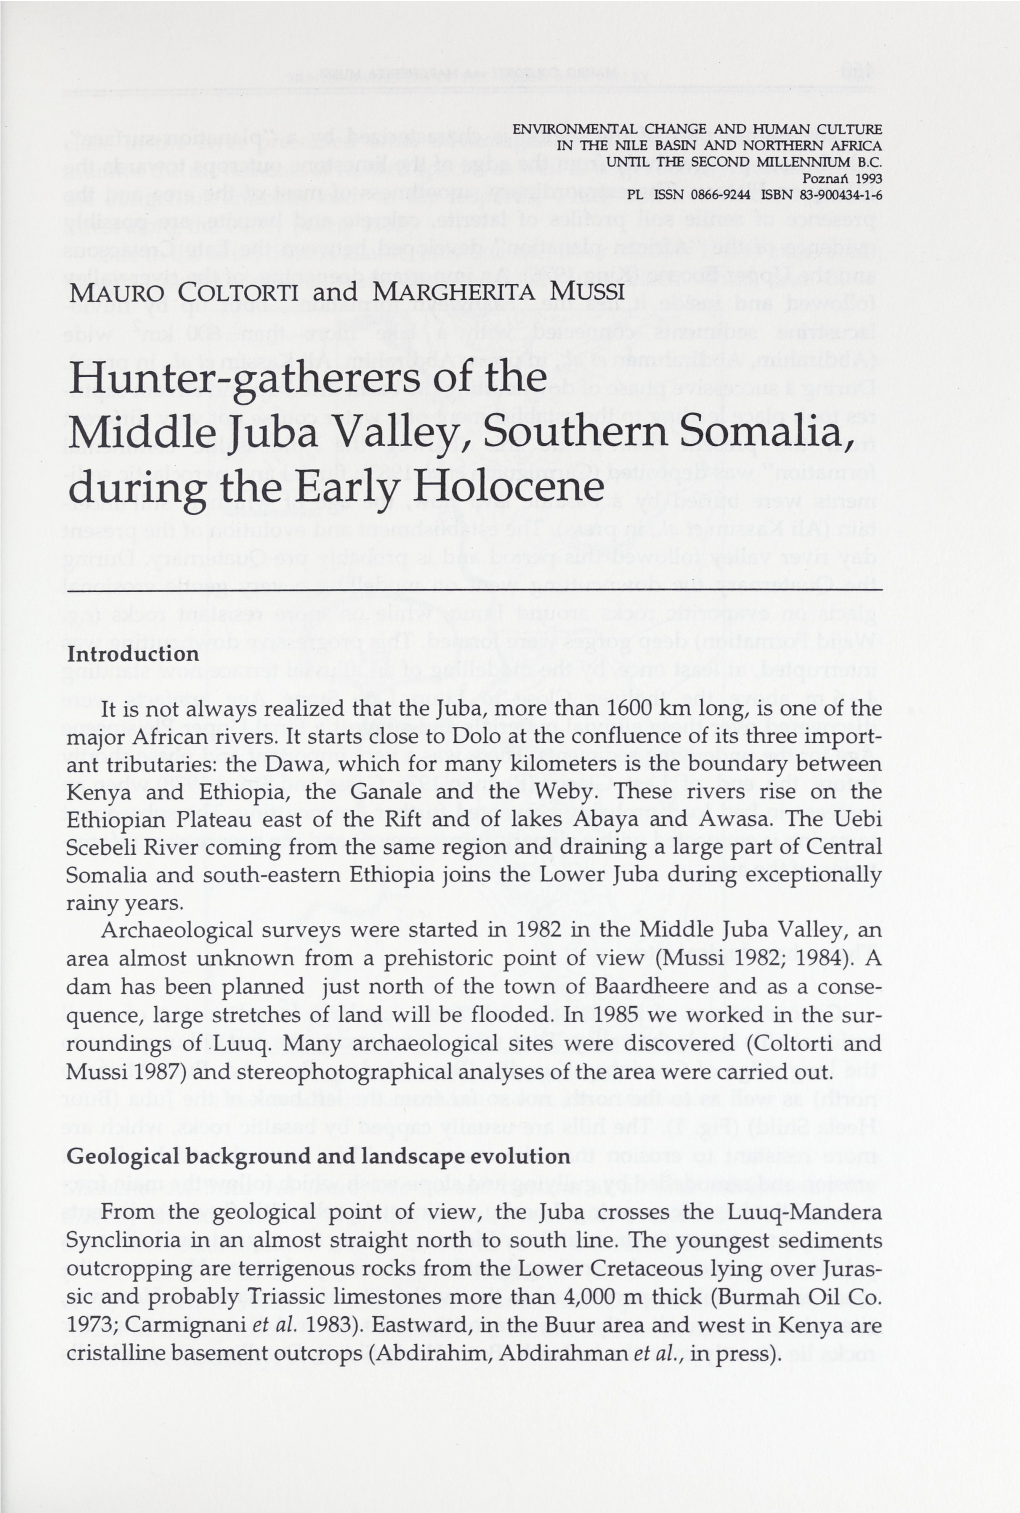 Hunter-Gatherers of the Middle Juba Valley, Southern Somalia, During the Early Holocene